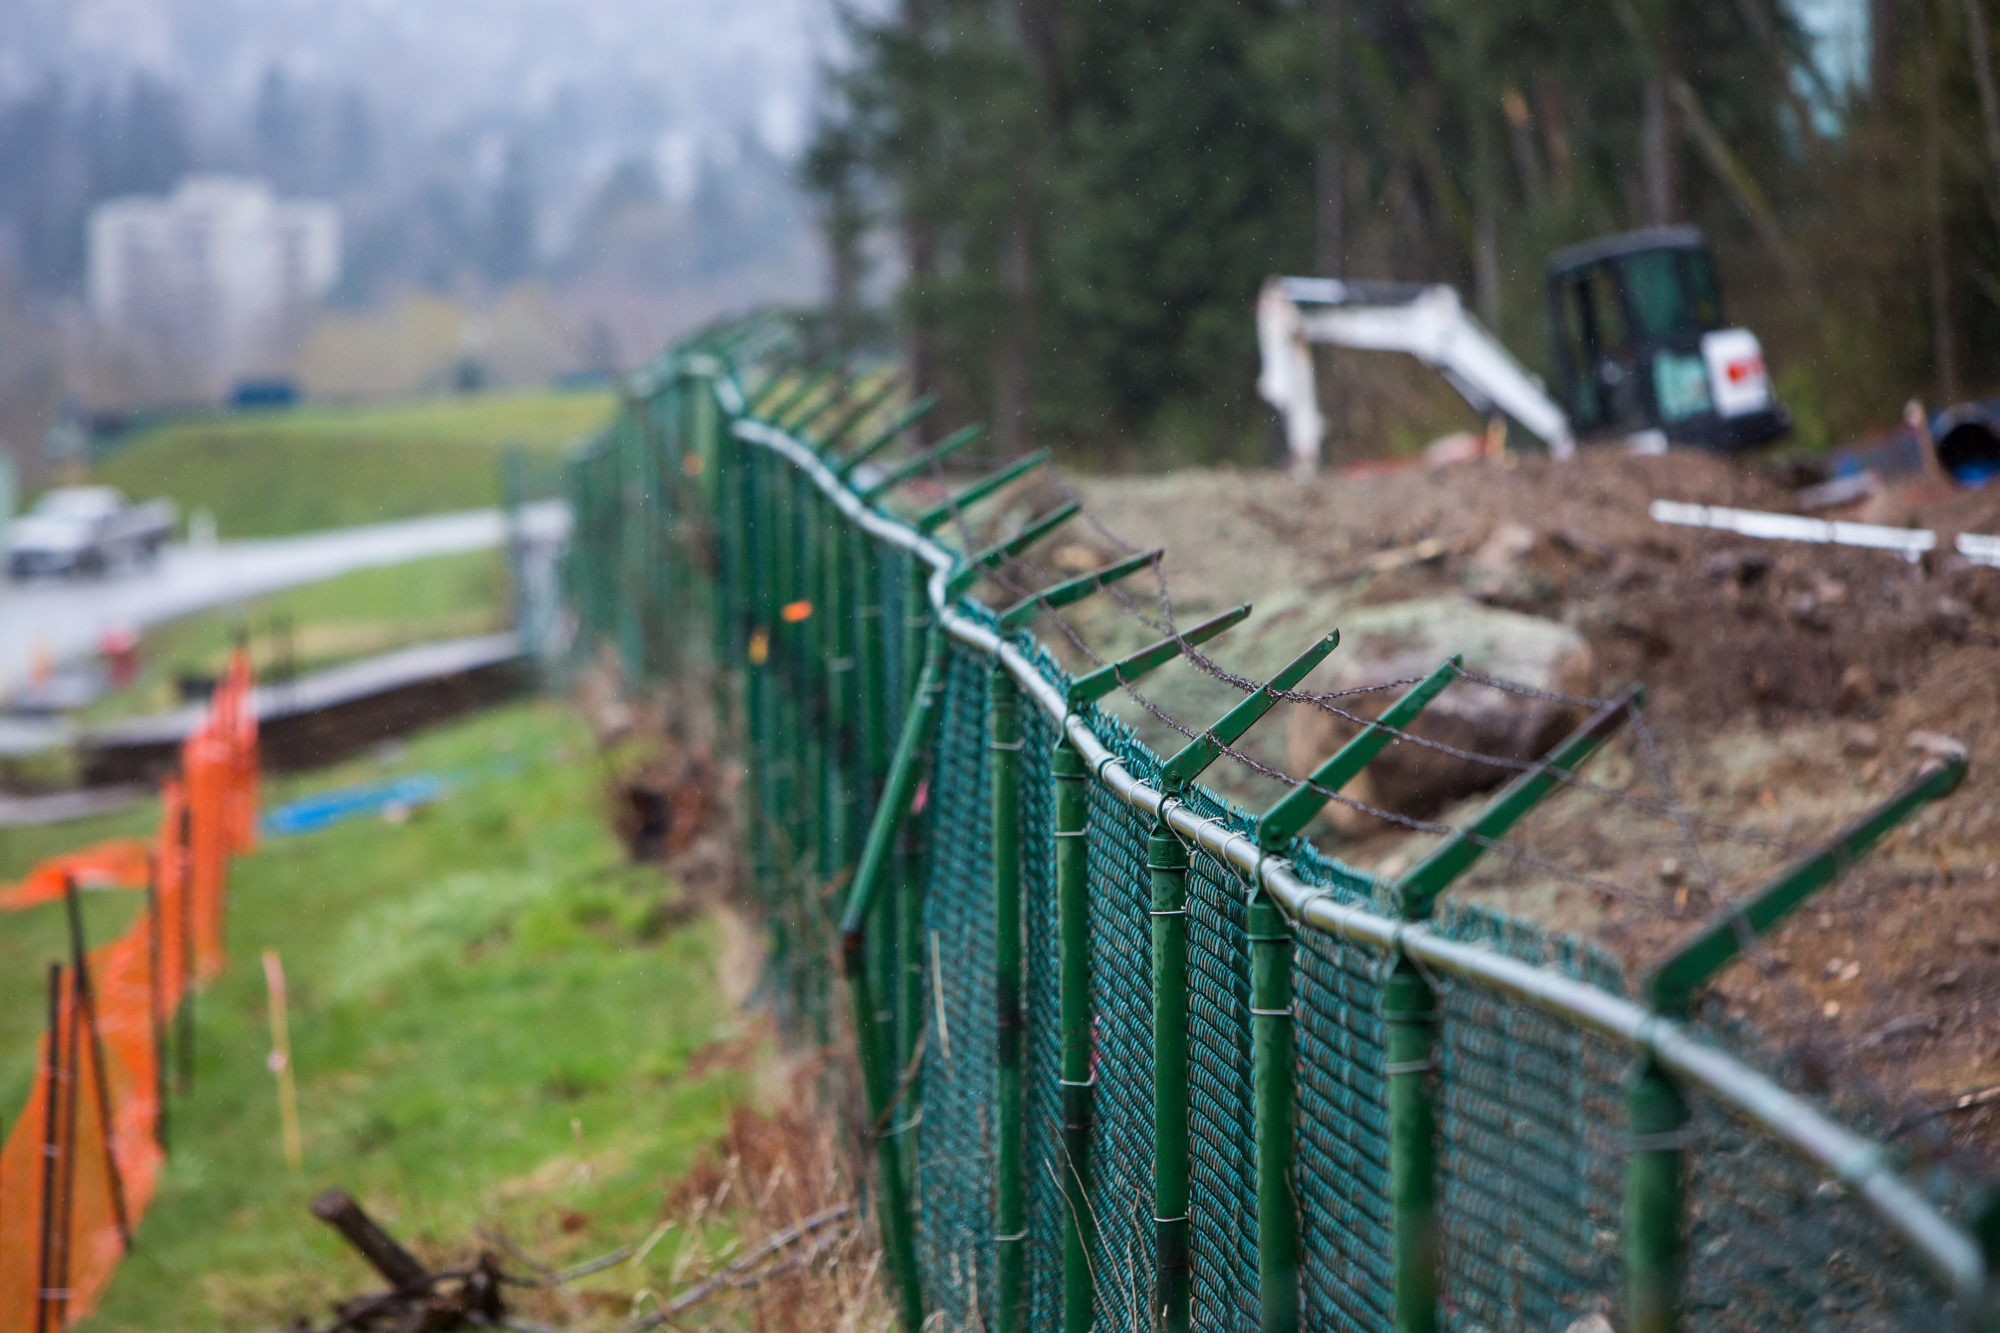 Barbed wire fencing stands at the Kinder Morgan Inc. Trans Mountain pipeline expansion site in Burnaby, British Columbia, on April 11.